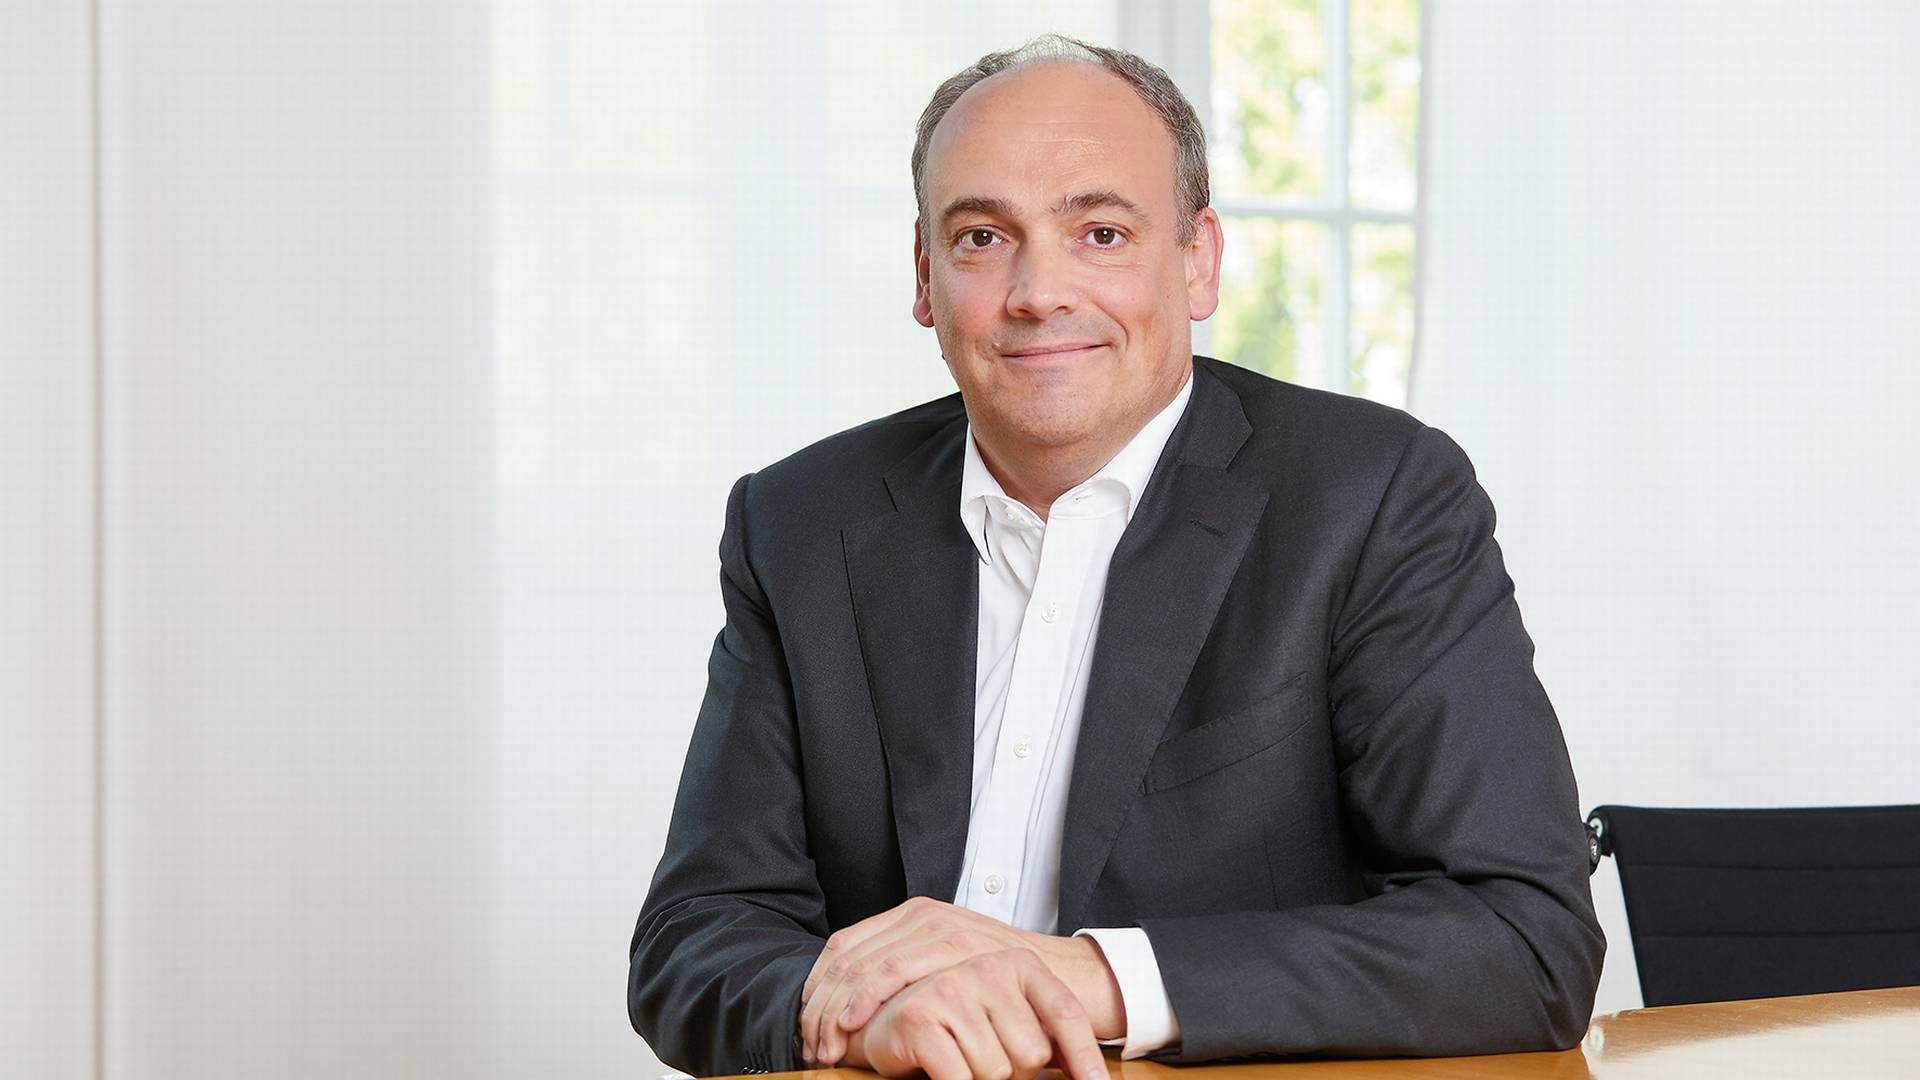 "When I look at our loadings during the last 10-12 weeks, we are actually a little bit up versus last year, so I am not that pessimistic to be honest," says Hapag-Lloyd CEO Rolf Habben Jansen about the outlook for the crowded container market. | Photo: Pr / Hapag-lloyd